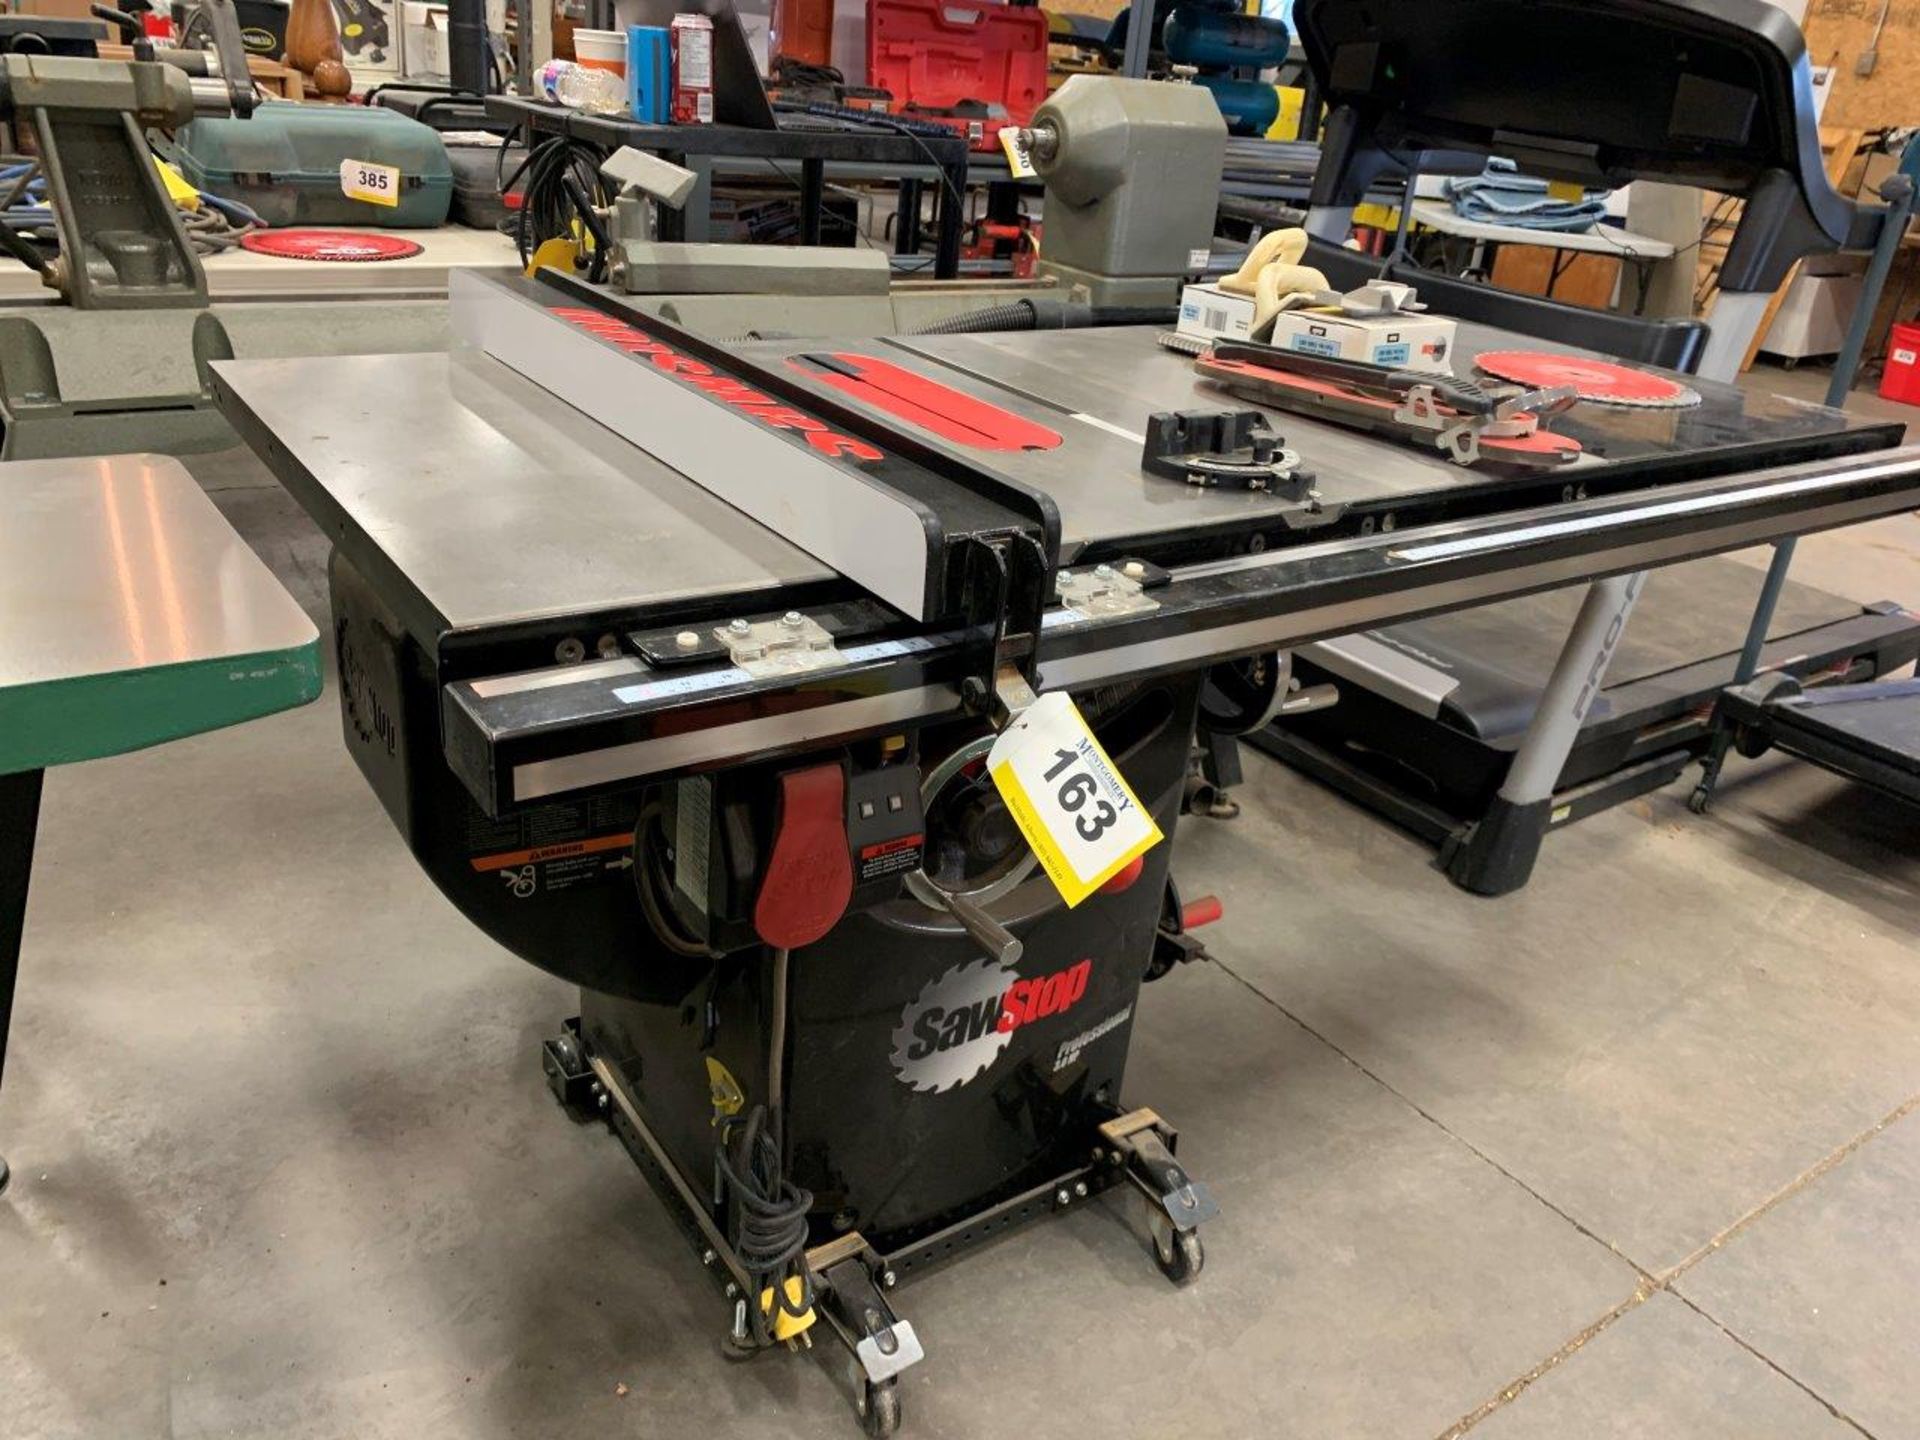 SAW-STOP PCS 31230 10" COMMERCIAL GRADE TABLE SAW W/ SAW STOP TECH., VACUUM ARMS, EXTRA BRAKE